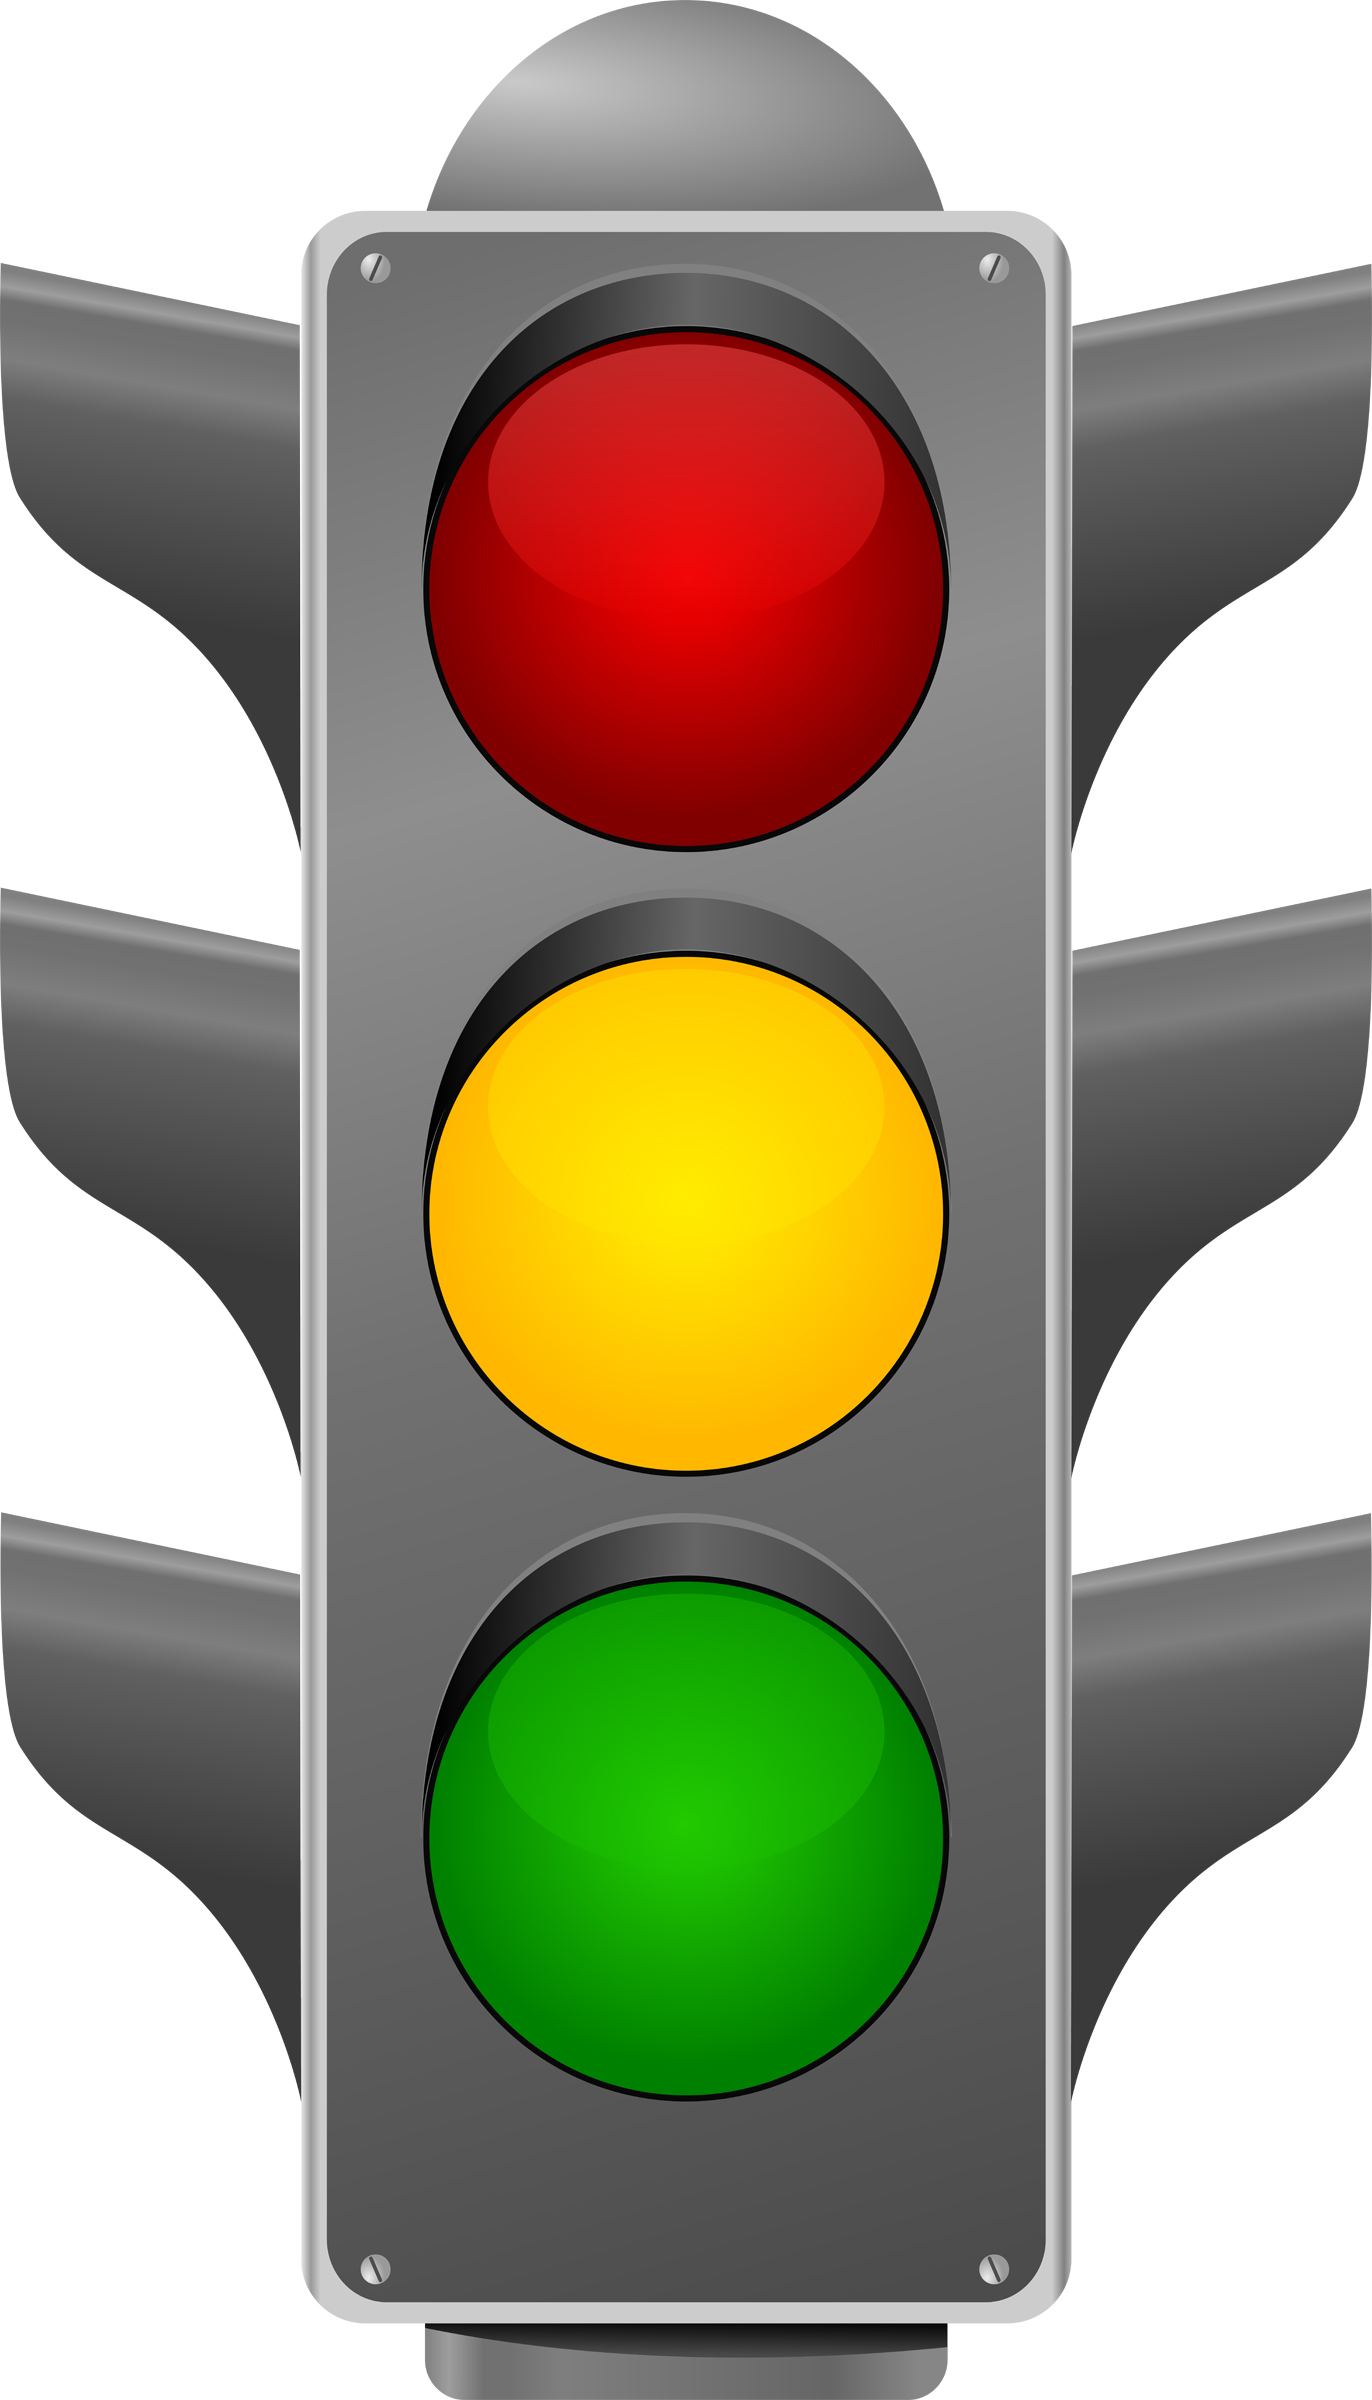 Traffic Light Clipart - Cliparts.co